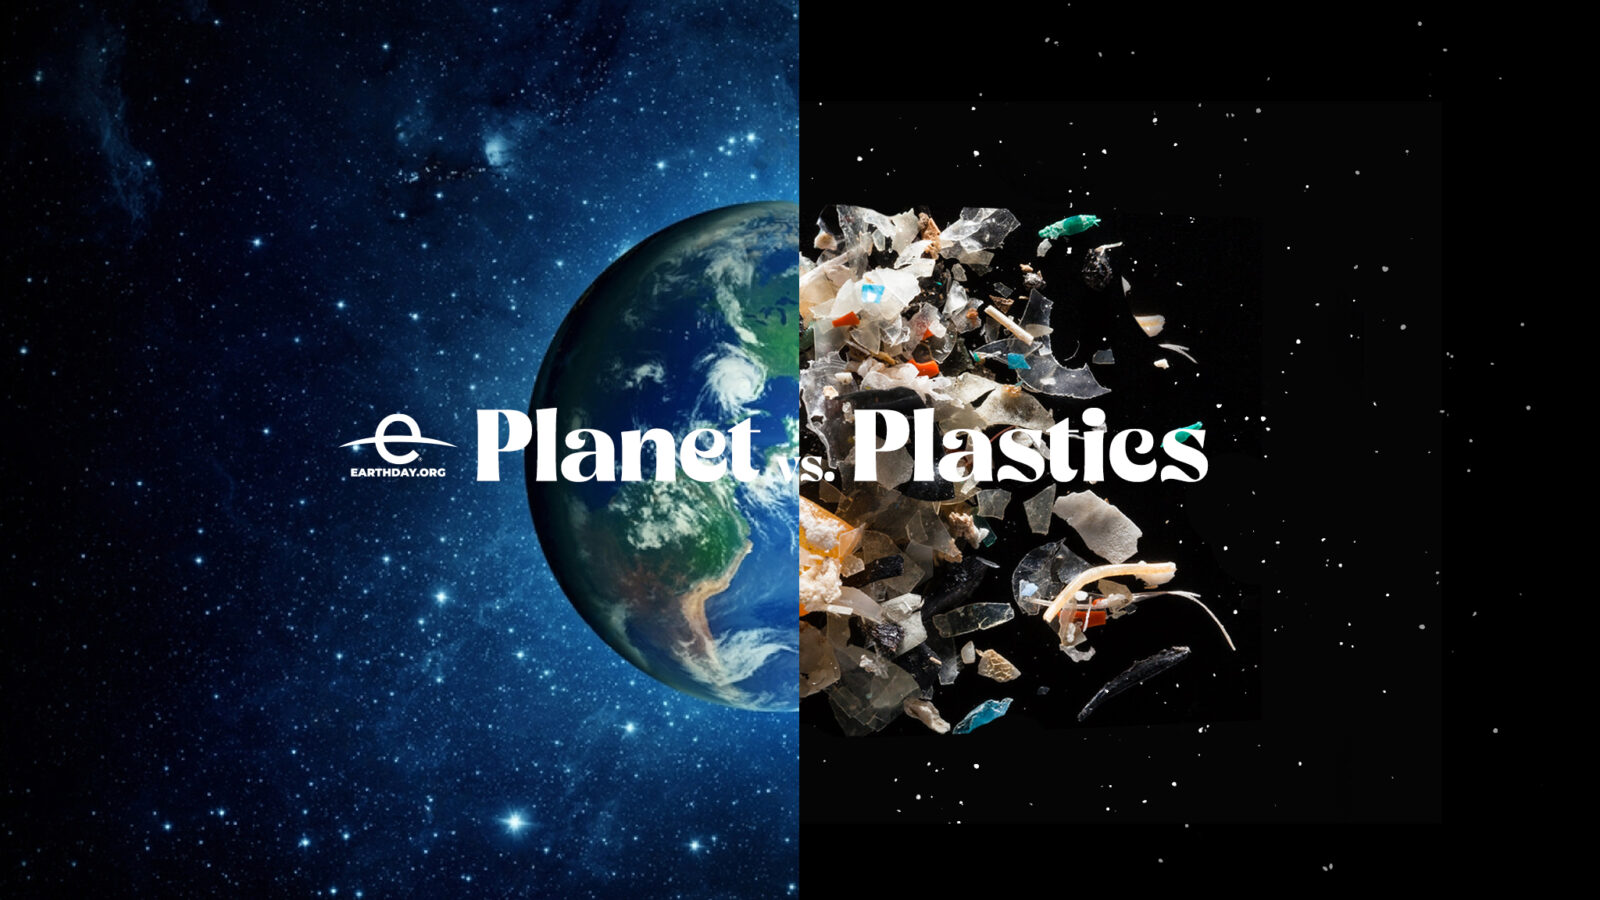 An image featuring a view of the planet Earth from space. Half of the planet looks normal; the other half is plastic trash exploding out of the planet and into space.